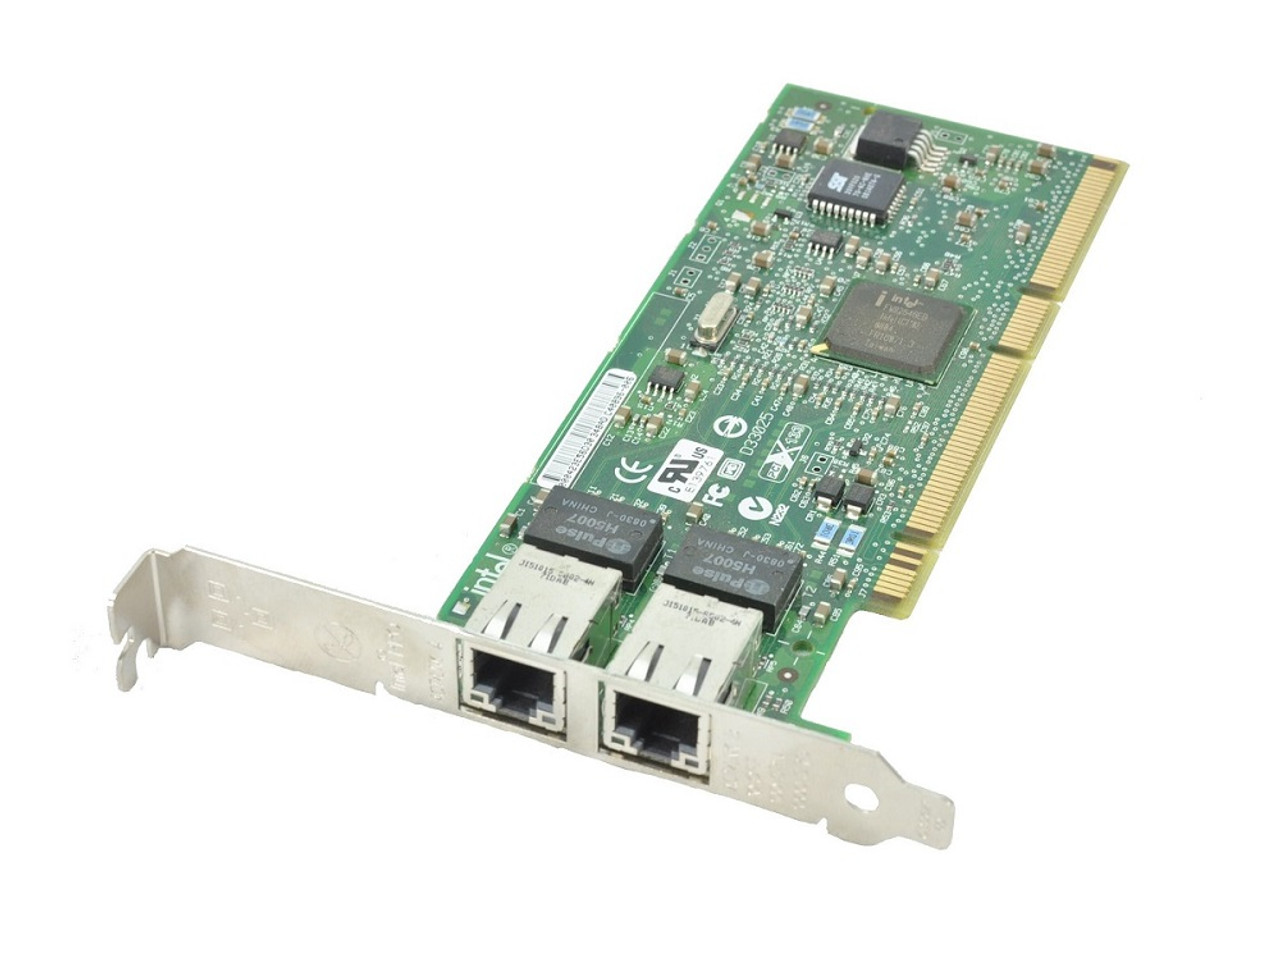 A0611826 - Dell Pro/1000 PF Dual Port Server Adapter - Network Adapter - PCI Express